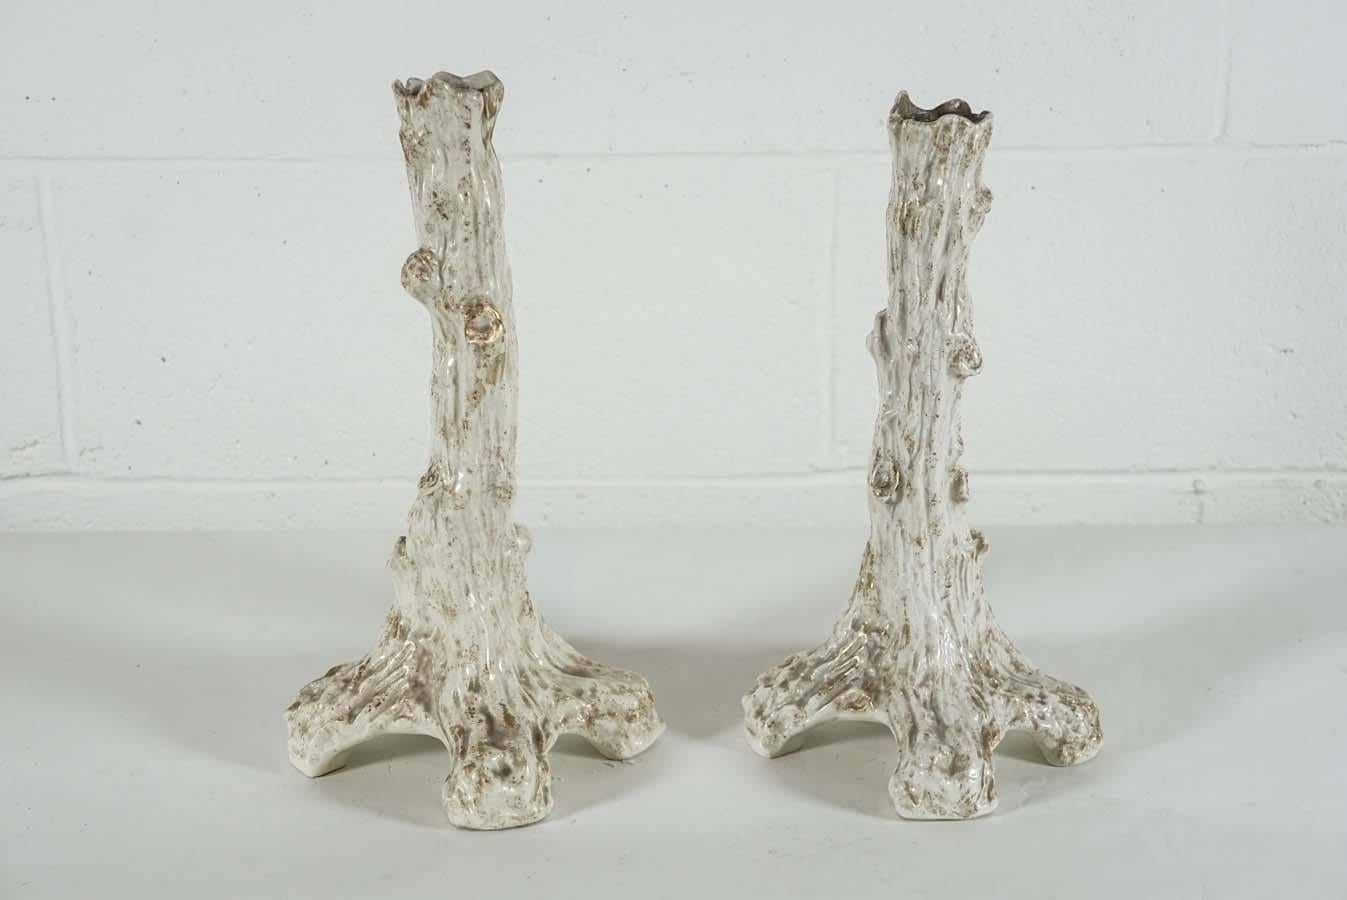 Here is a beautiful pair of Sitzendorf faux bois porcelain candlesticks with a gold wash finish.